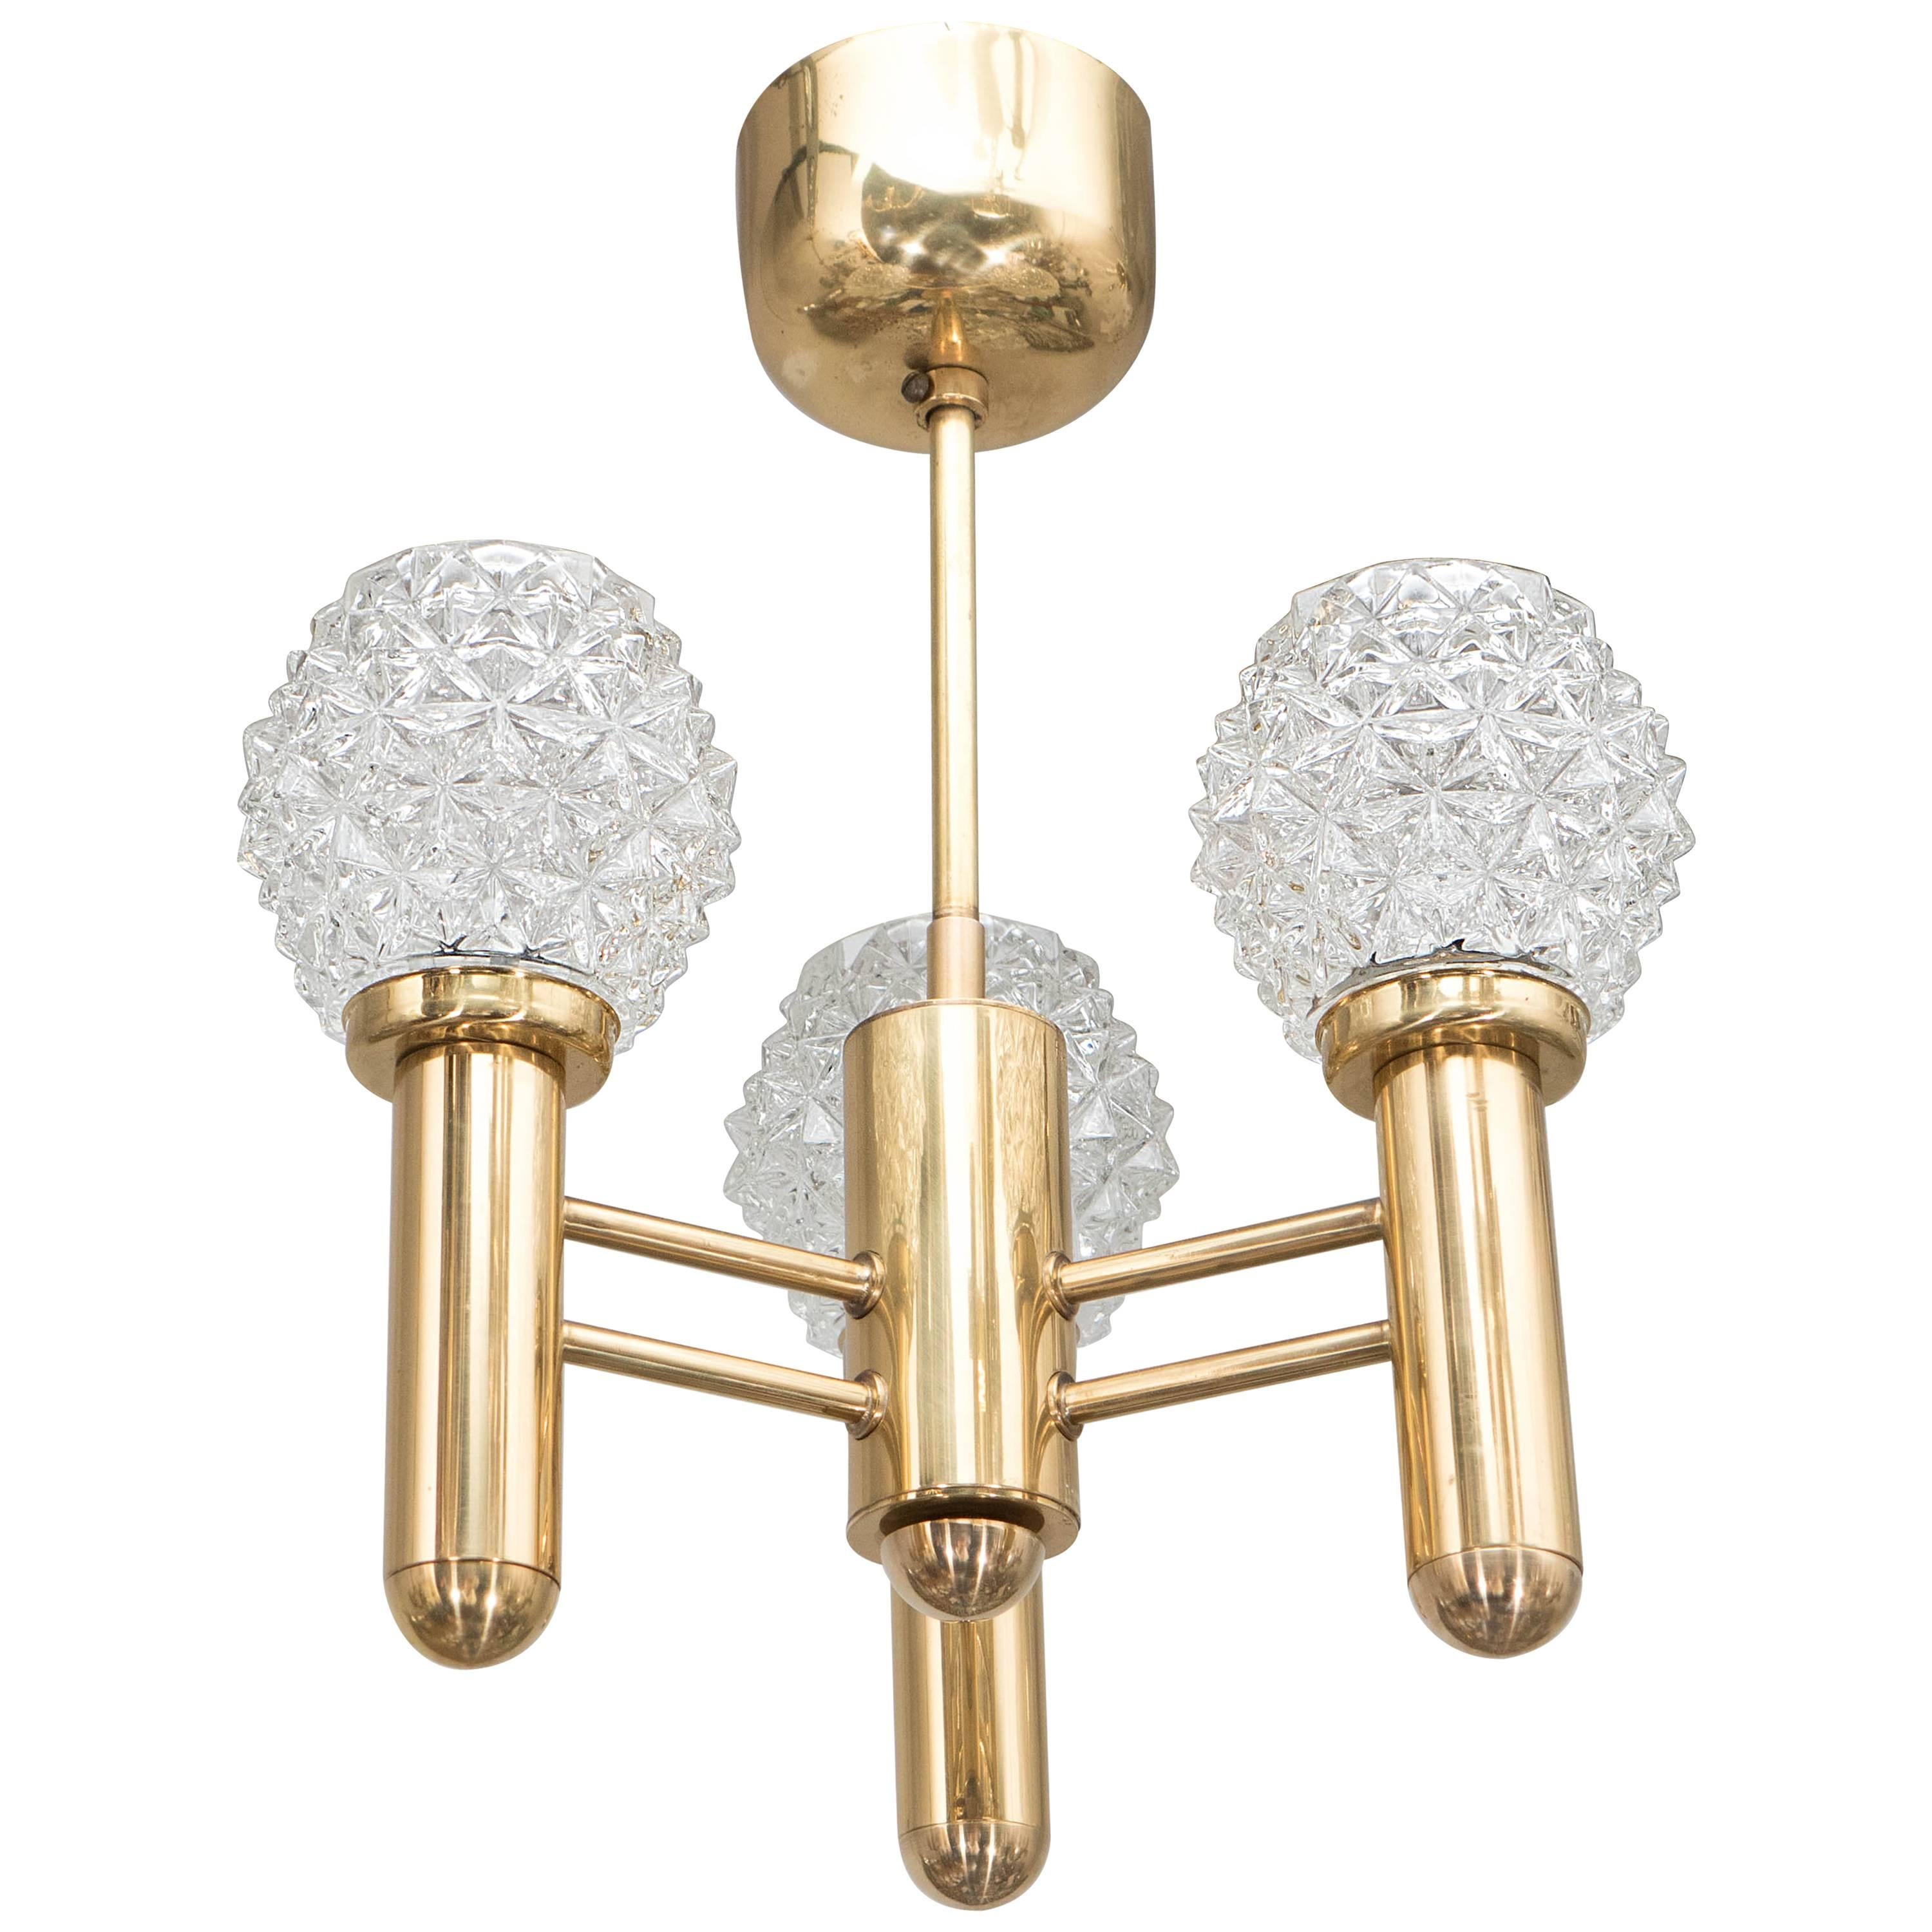 Mid-Century Modern Three-Arm Brass Chandelier with Faceted Glass Globes